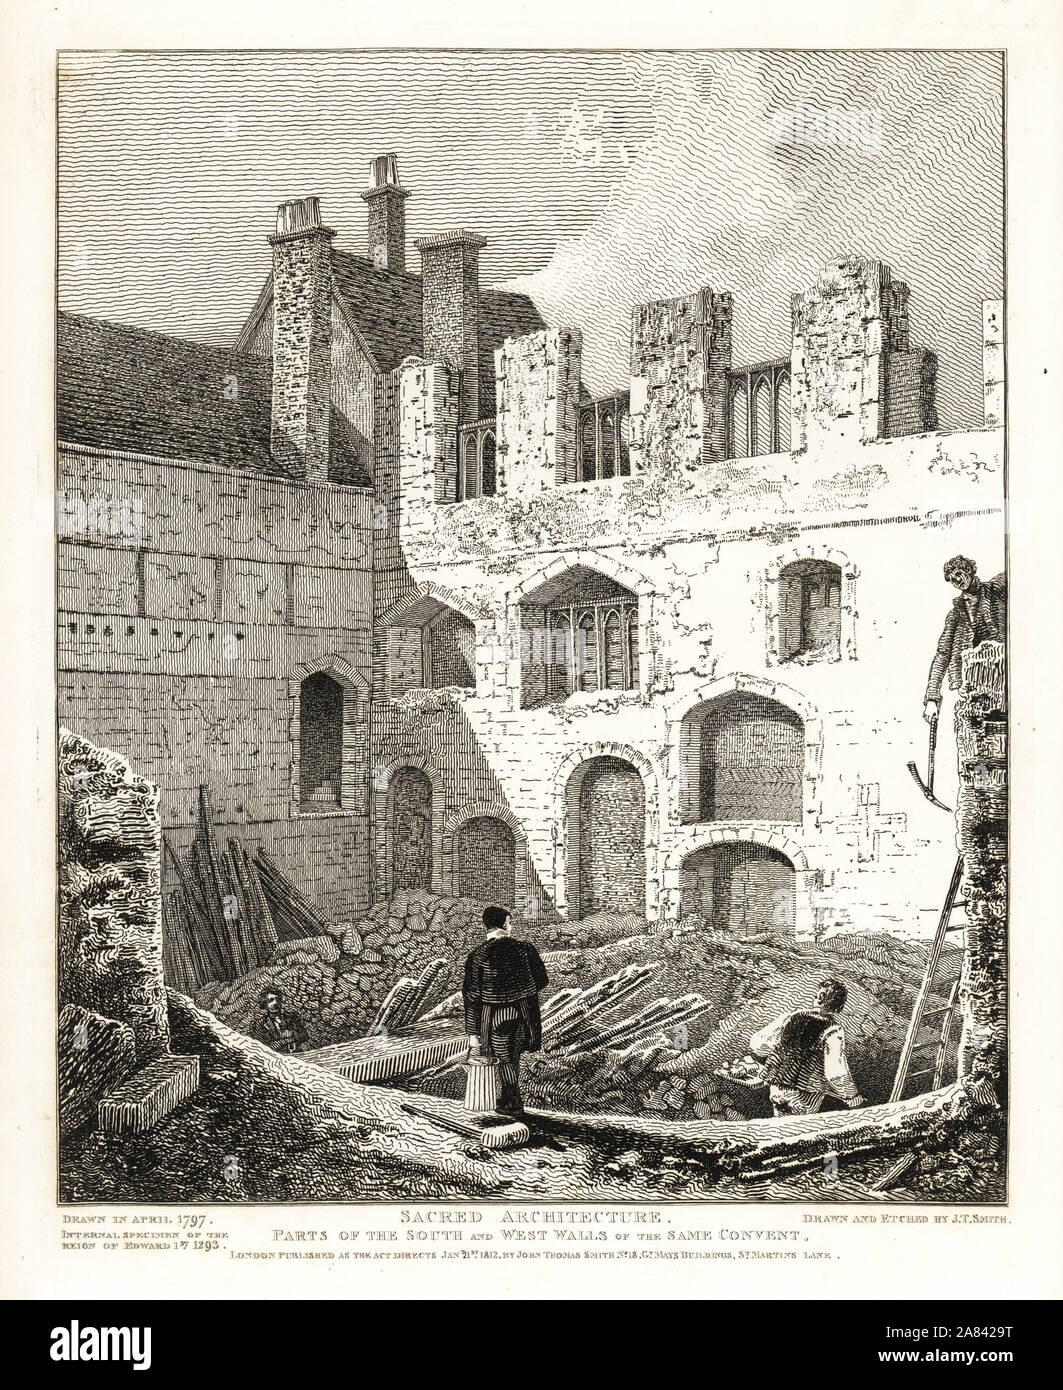 Parts of the south and west walls of the Convent of St. Clare or Minoresses, founded 1293. After the fire of March 23, 1797. Walls of Caen stone and chalk, timber oak and chestnut. Copperplate engraving drawn and etched by John Thomas Smith from his Topography of London, 1812. Stock Photo